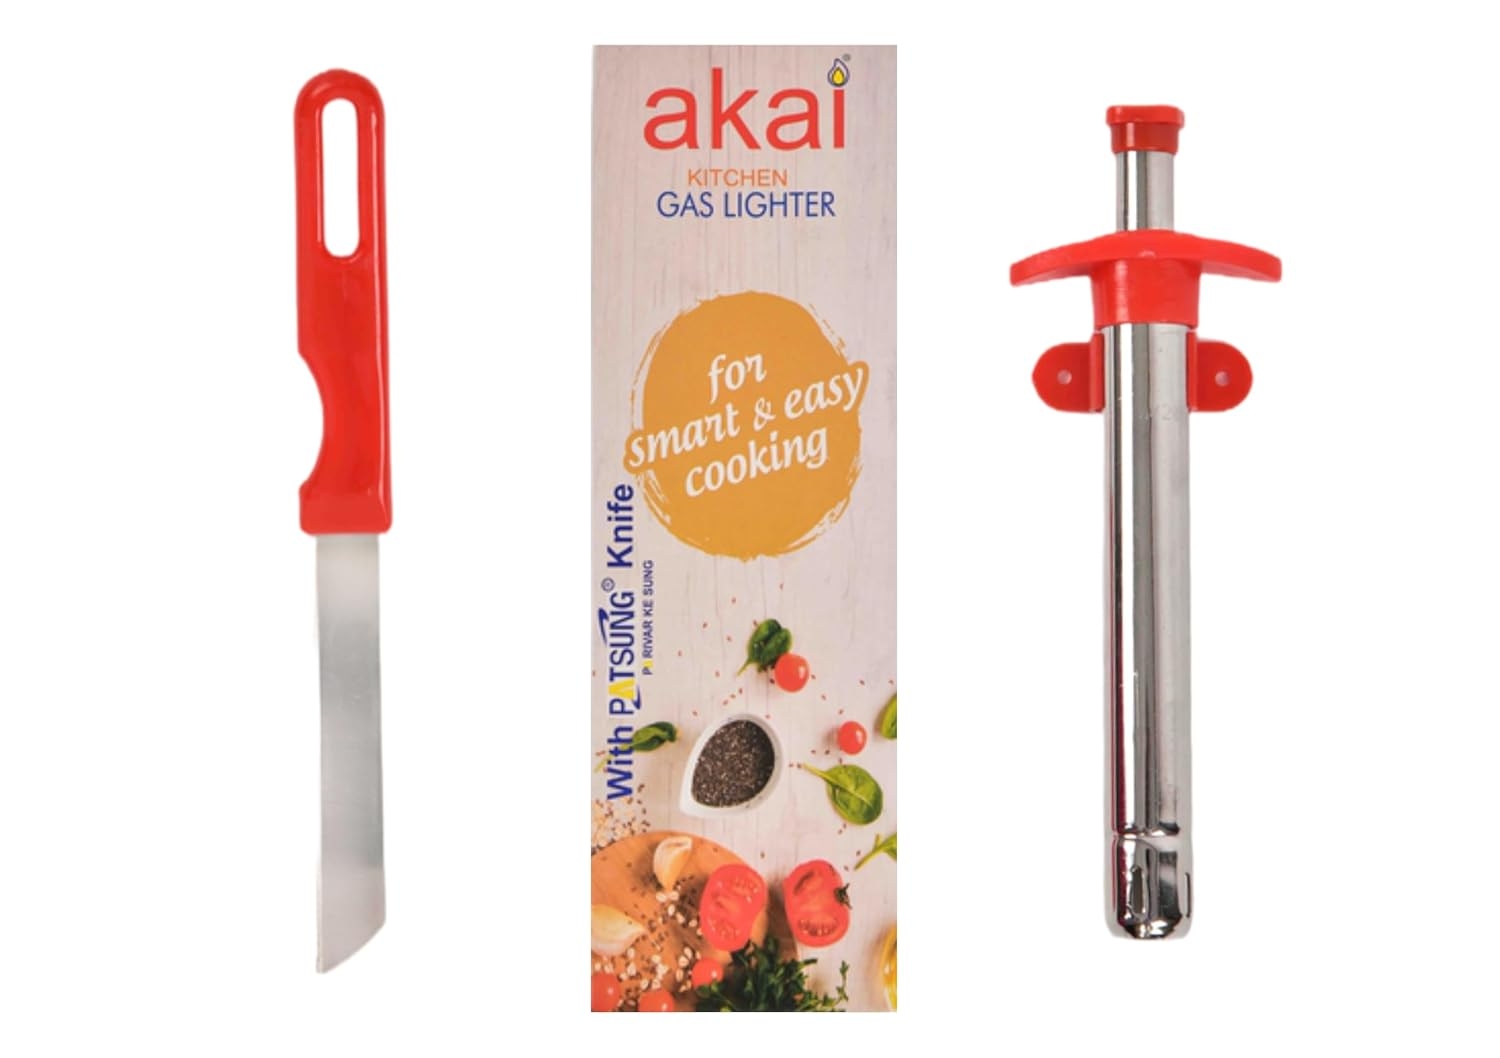 Akai Stainless Steel Kitchen Gas Lighter | Free Kitchen Knife, Dual Utility Delight, Gas Lighter, Knife Combo Pack Gas Lighters